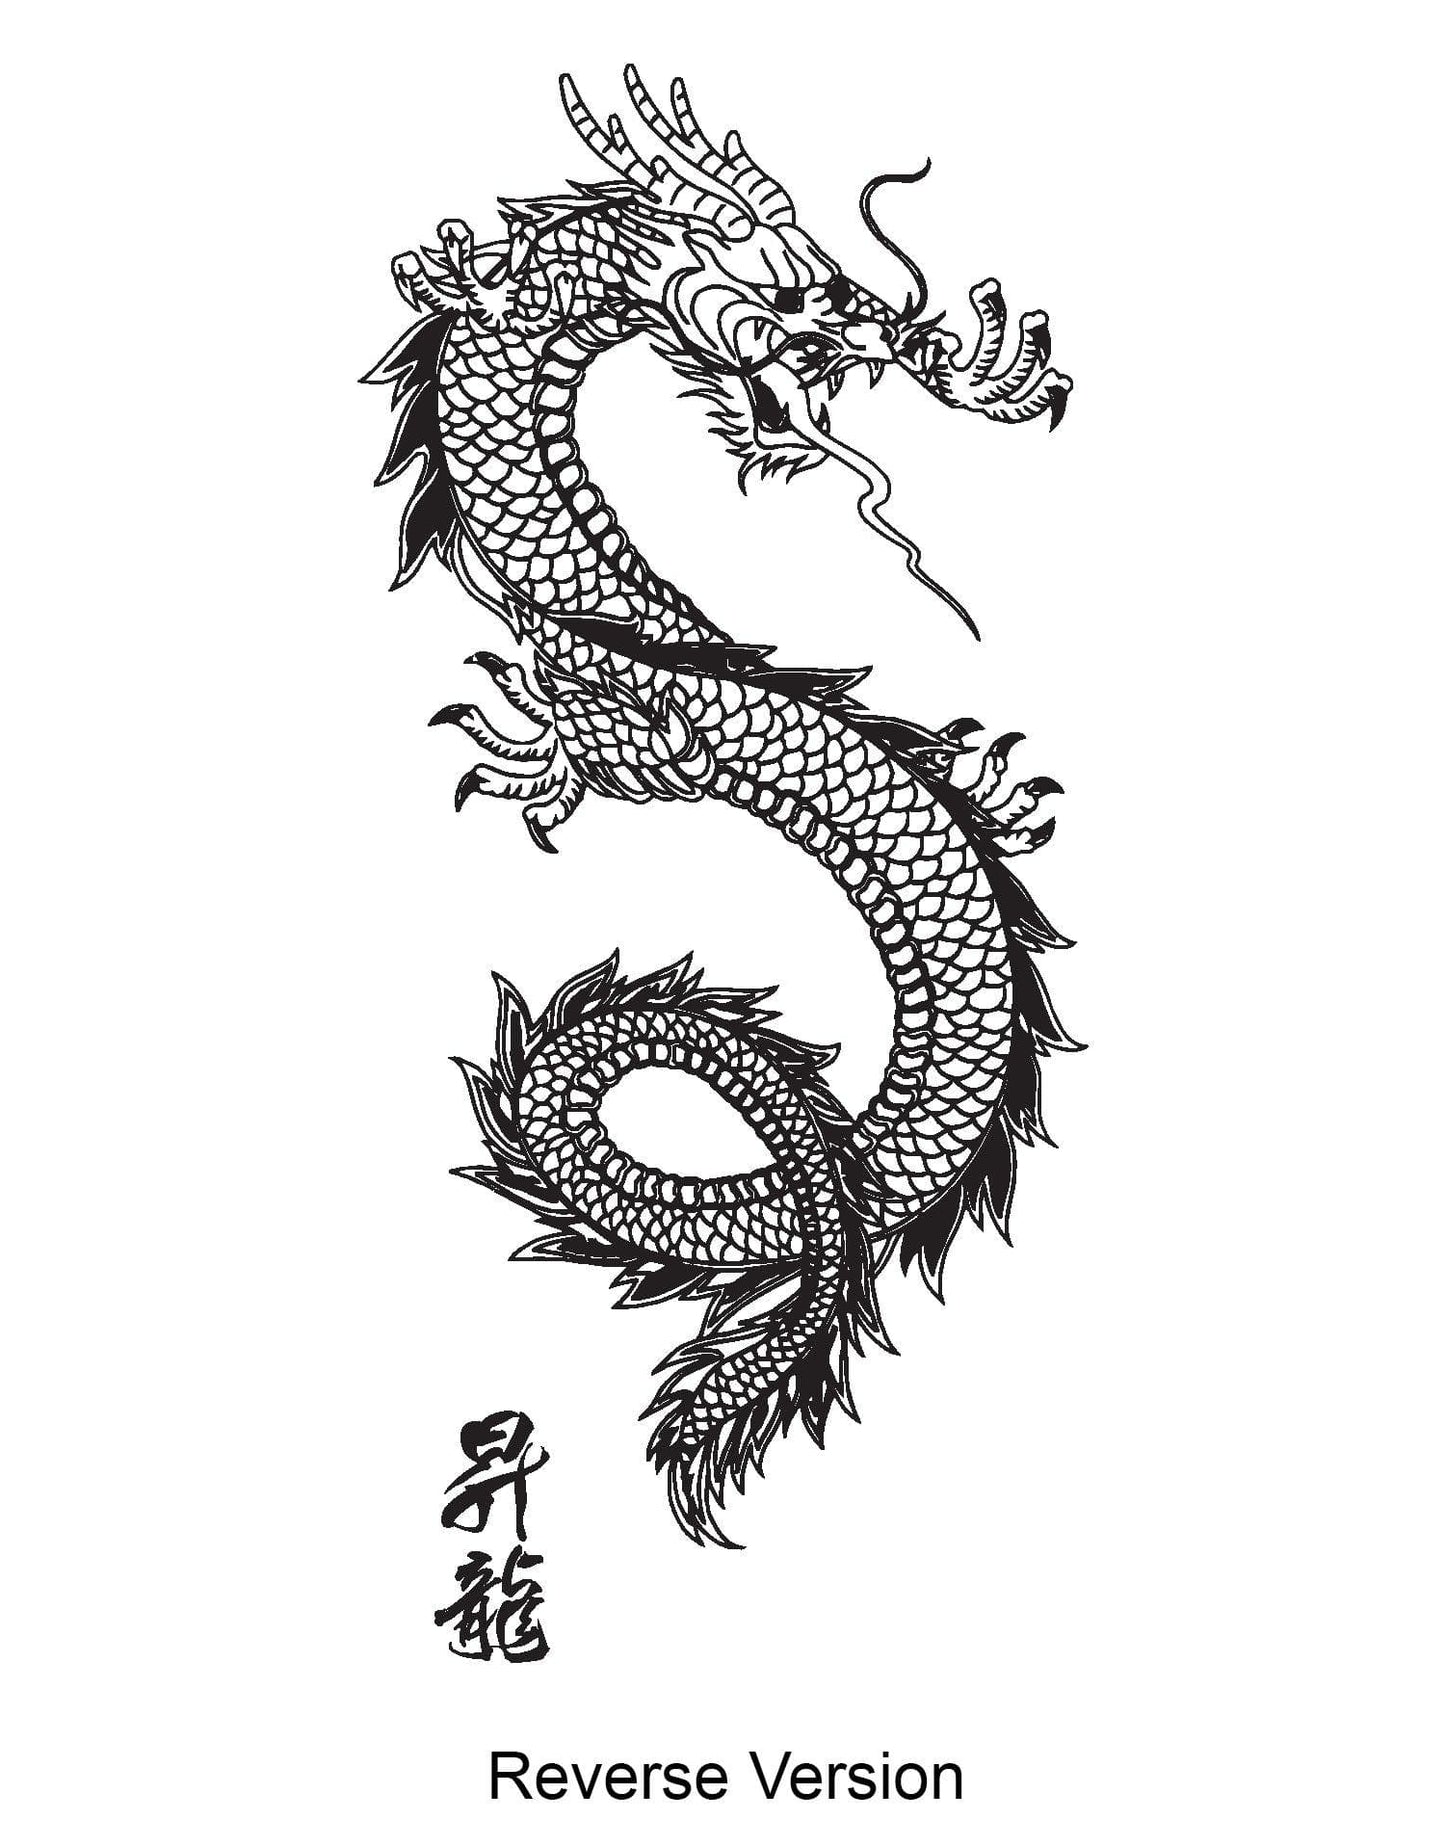 Vinyl Wall Decal Chinese Dragon Asian Style Fantasy Stickers Unique Gi —  Wallstickers4you